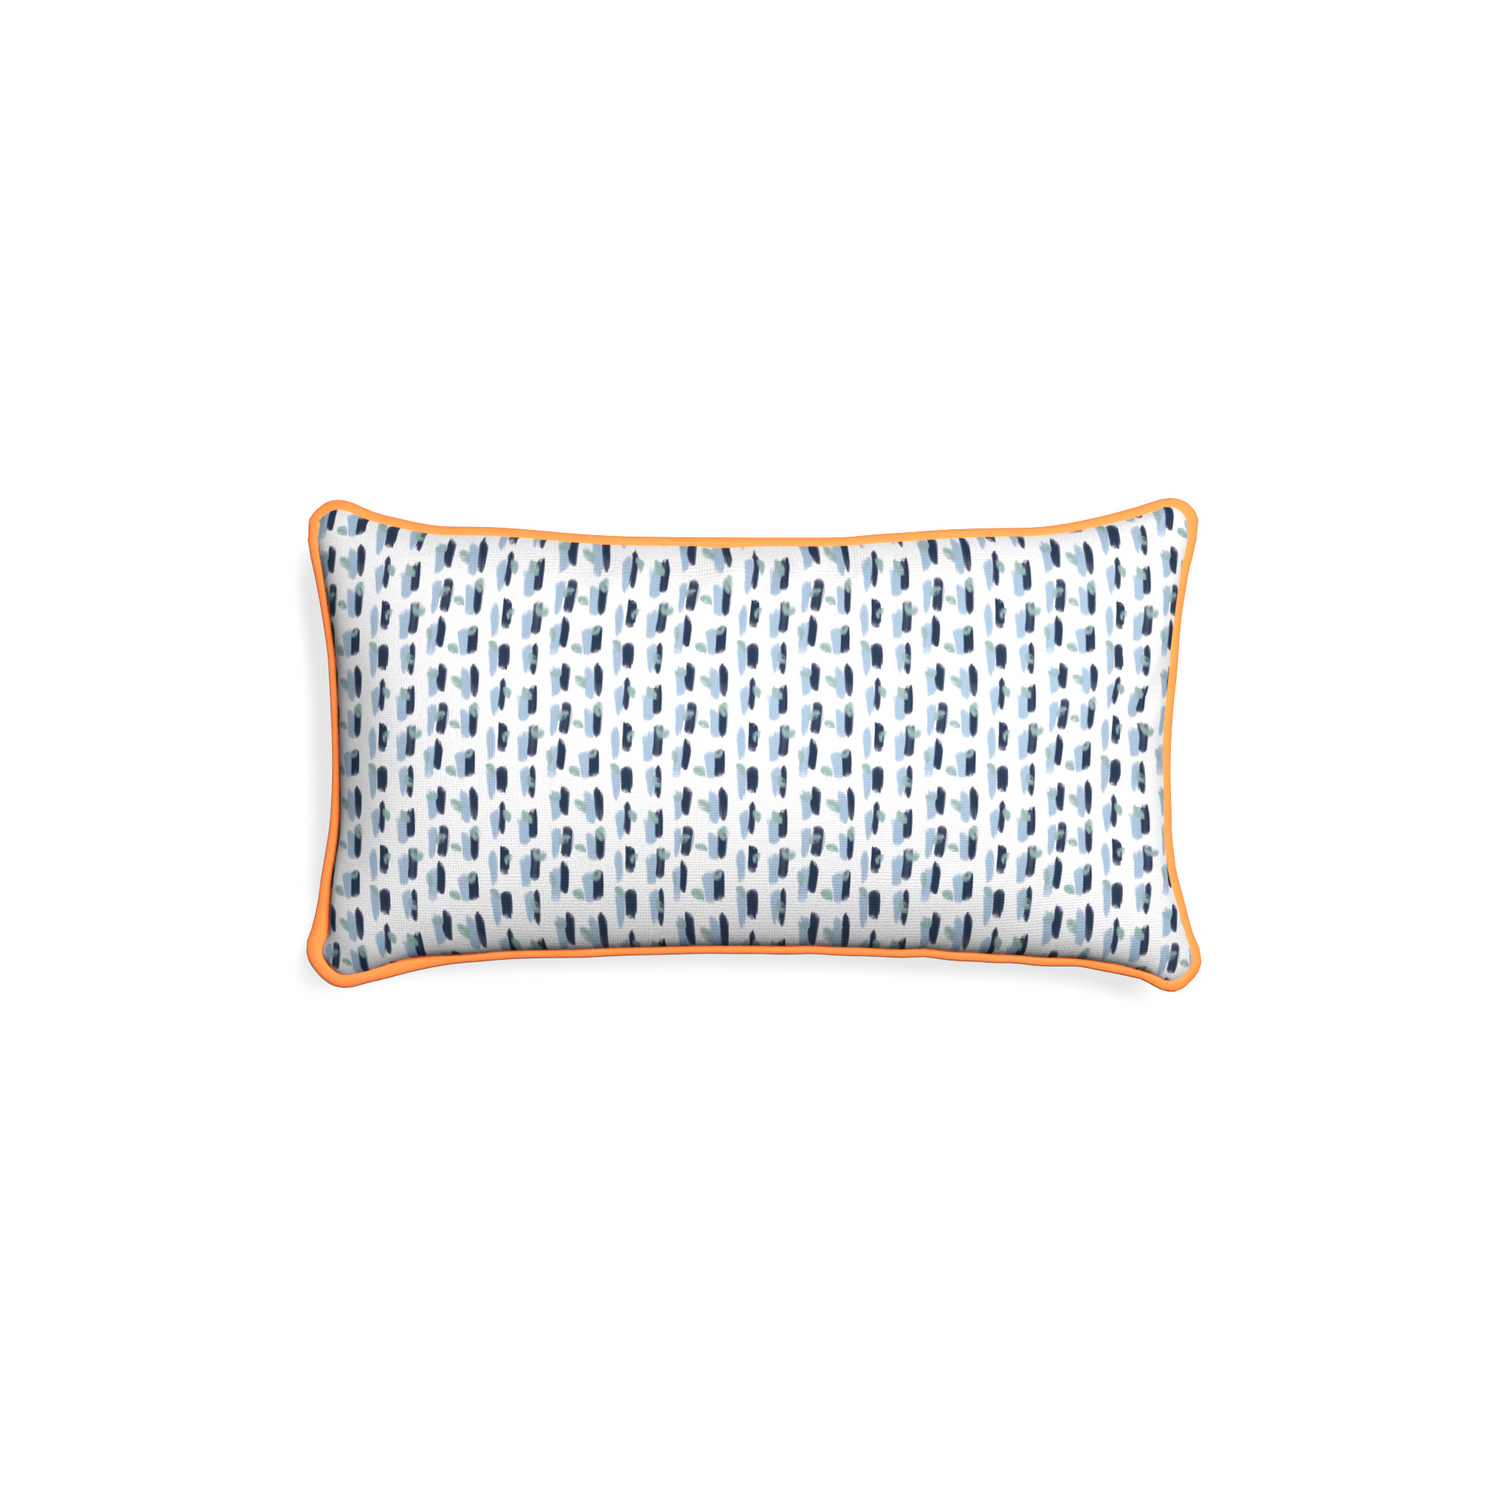 Petite-lumbar poppy custom blue and whitepillow with clementine piping on white background